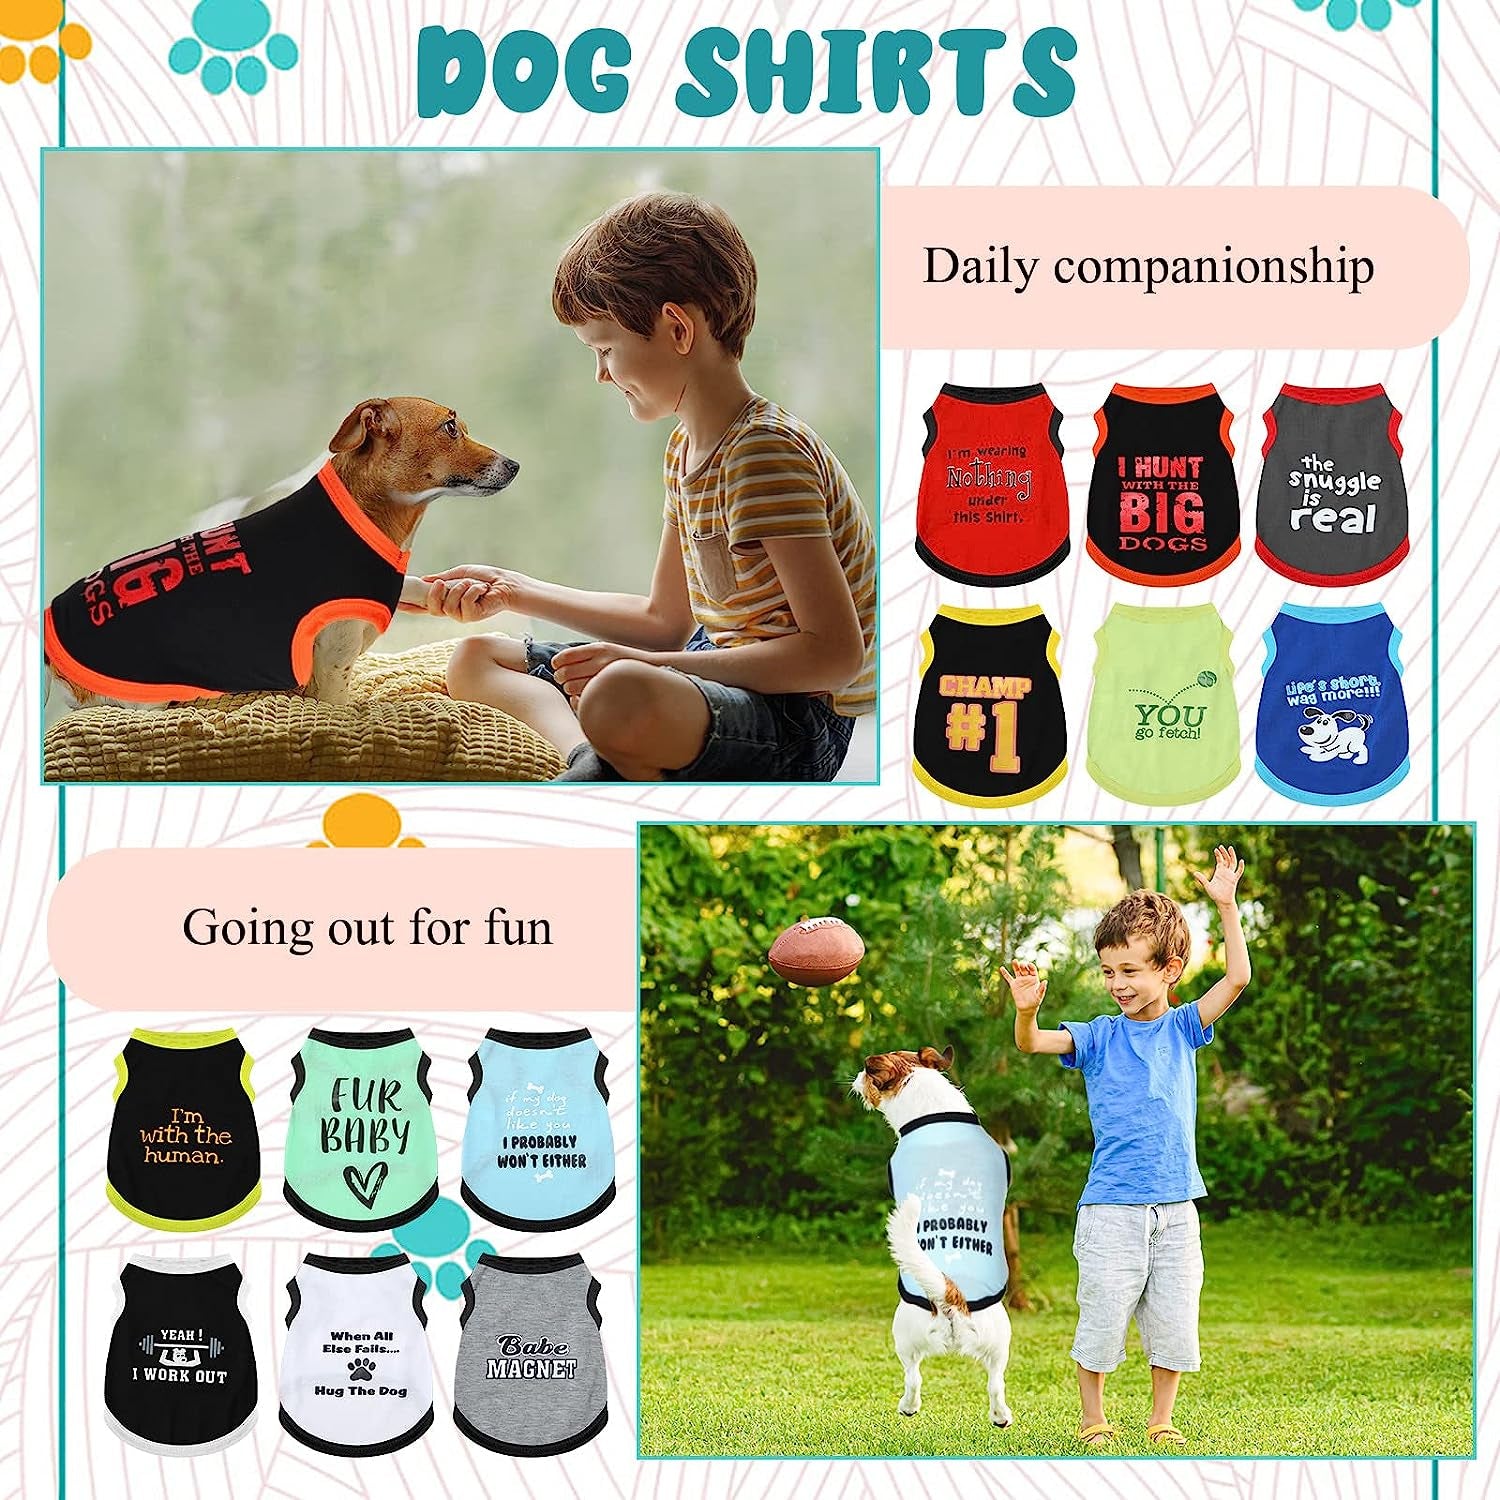 12 Pieces Dog Shirts Pet Printed Clothes with Funny Letters Summer Pet T Shirts Cool Puppy Shirts Breathable Dog Outfit Soft Dog Sweatshirt for Pet Dogs Cats Accessories, 12 Styles (X-Large)